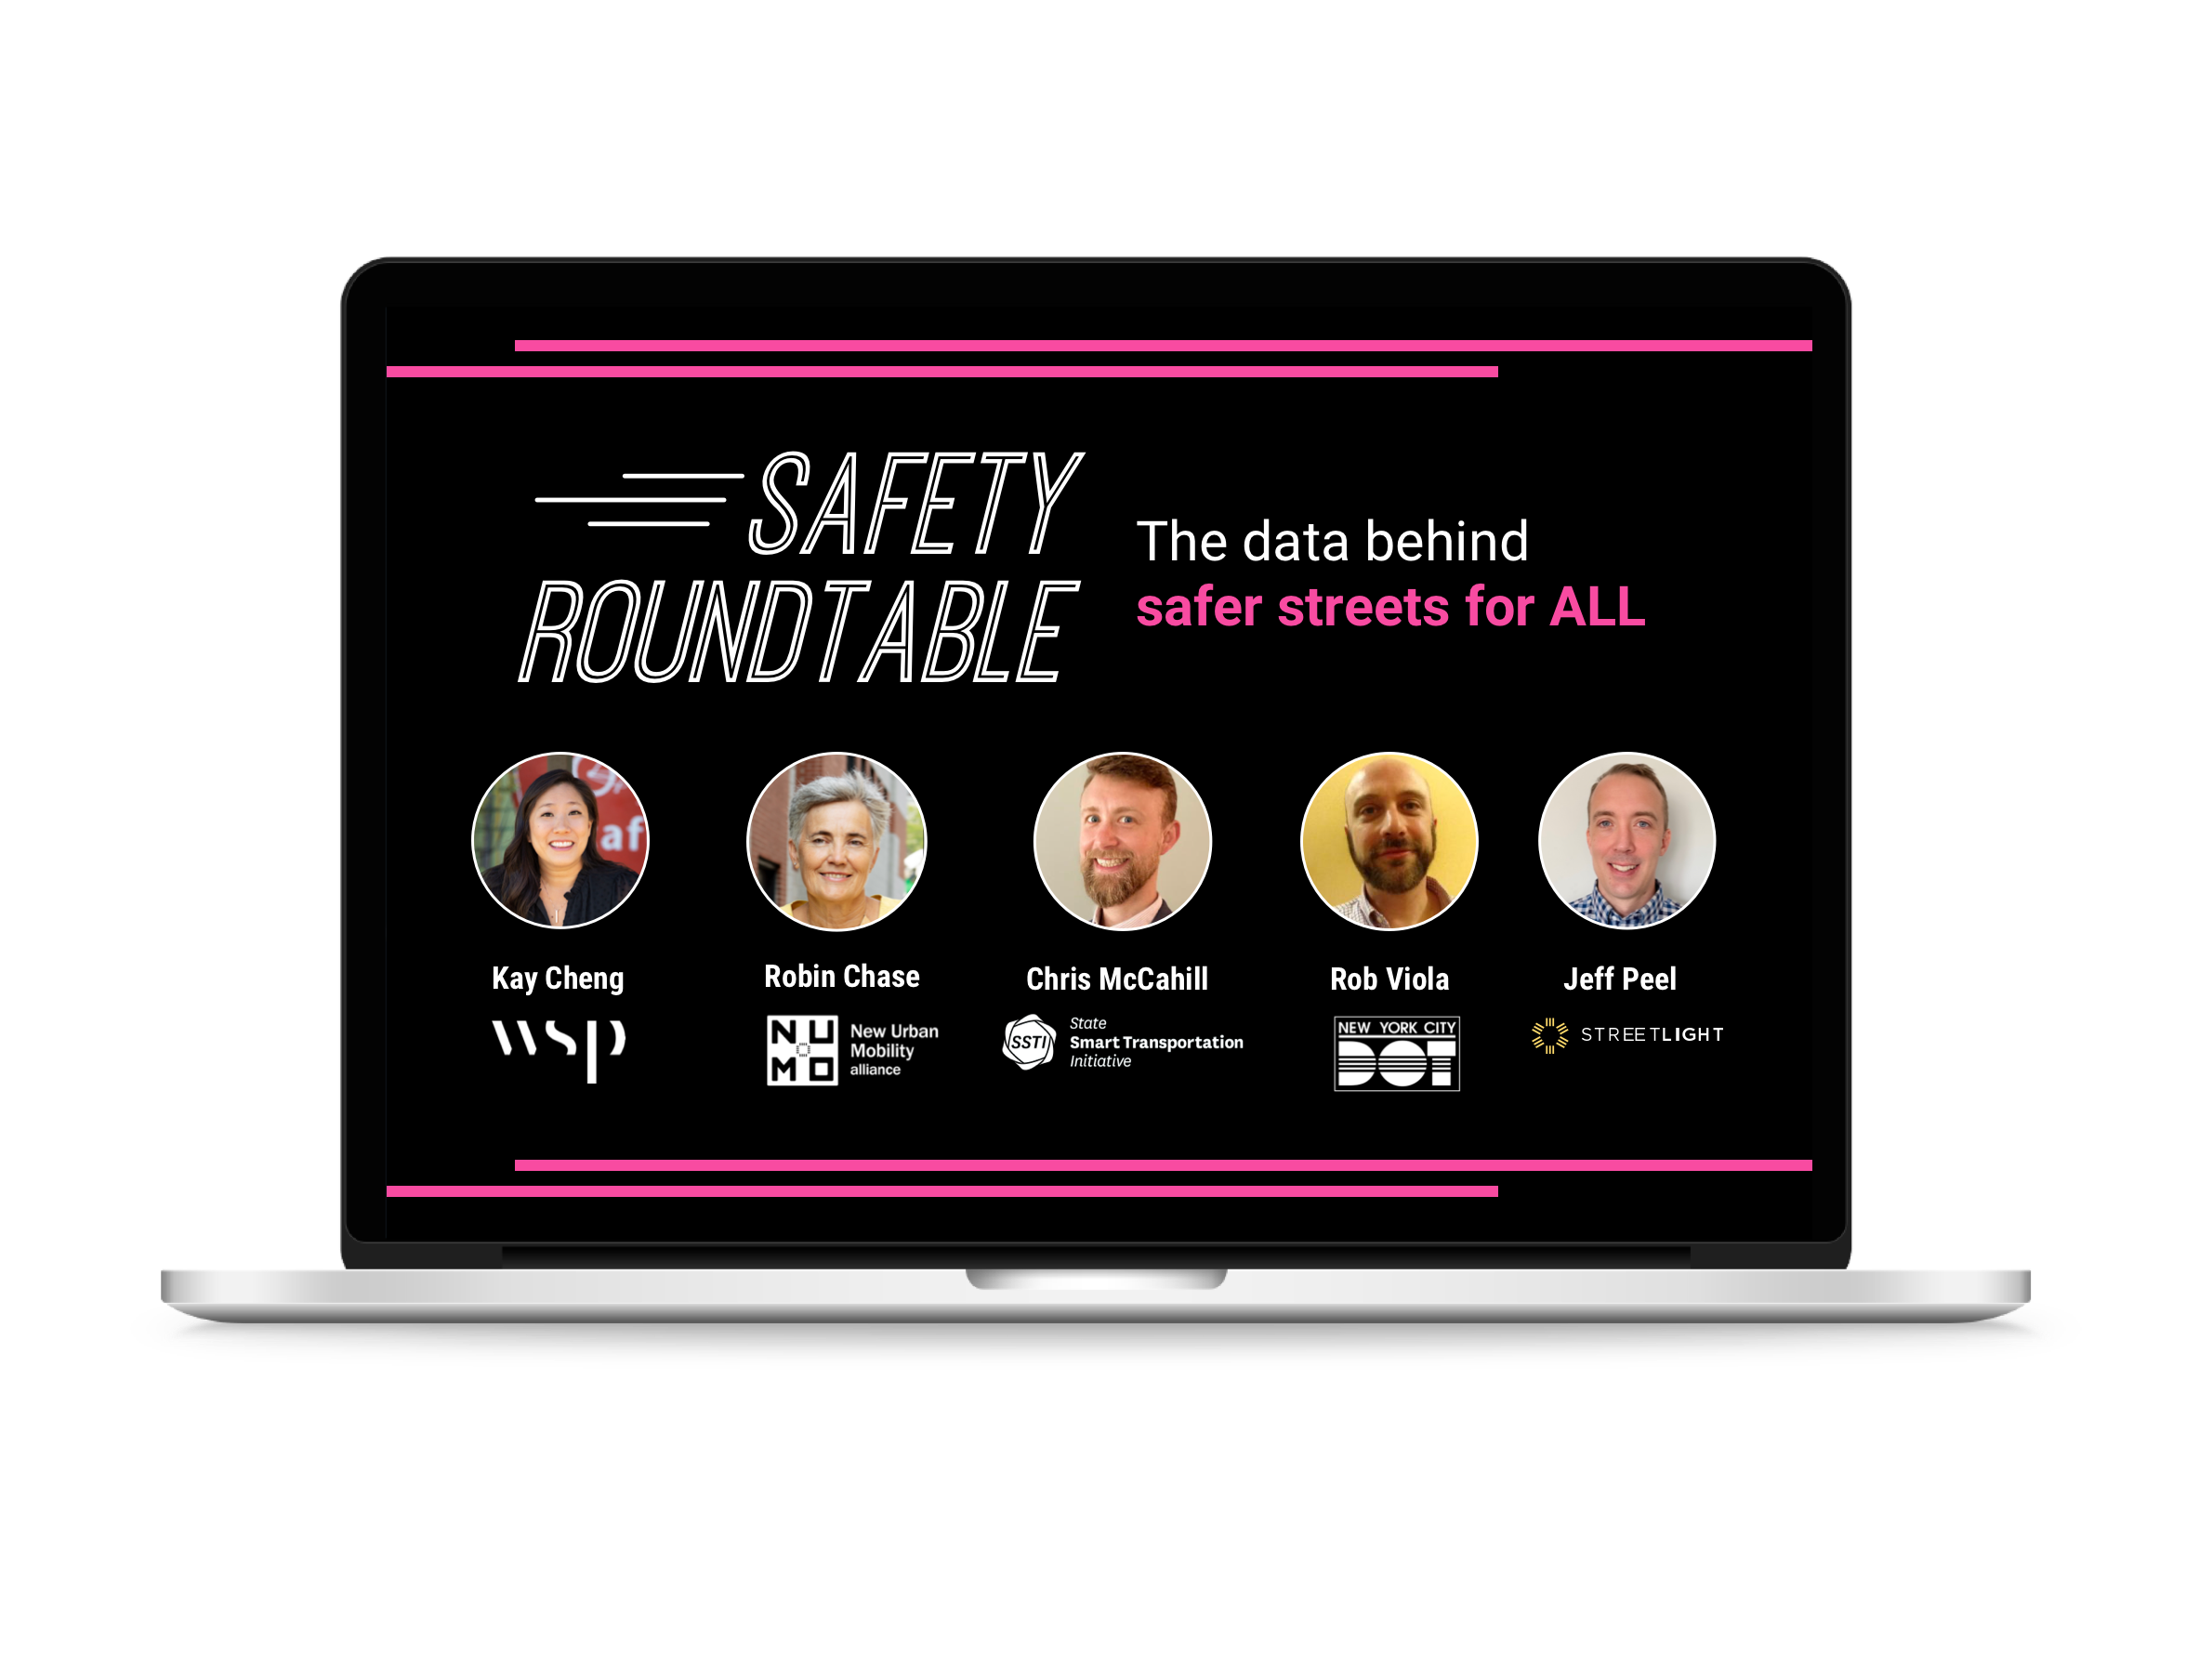 Safety Roundtable the data behind safer streets for all